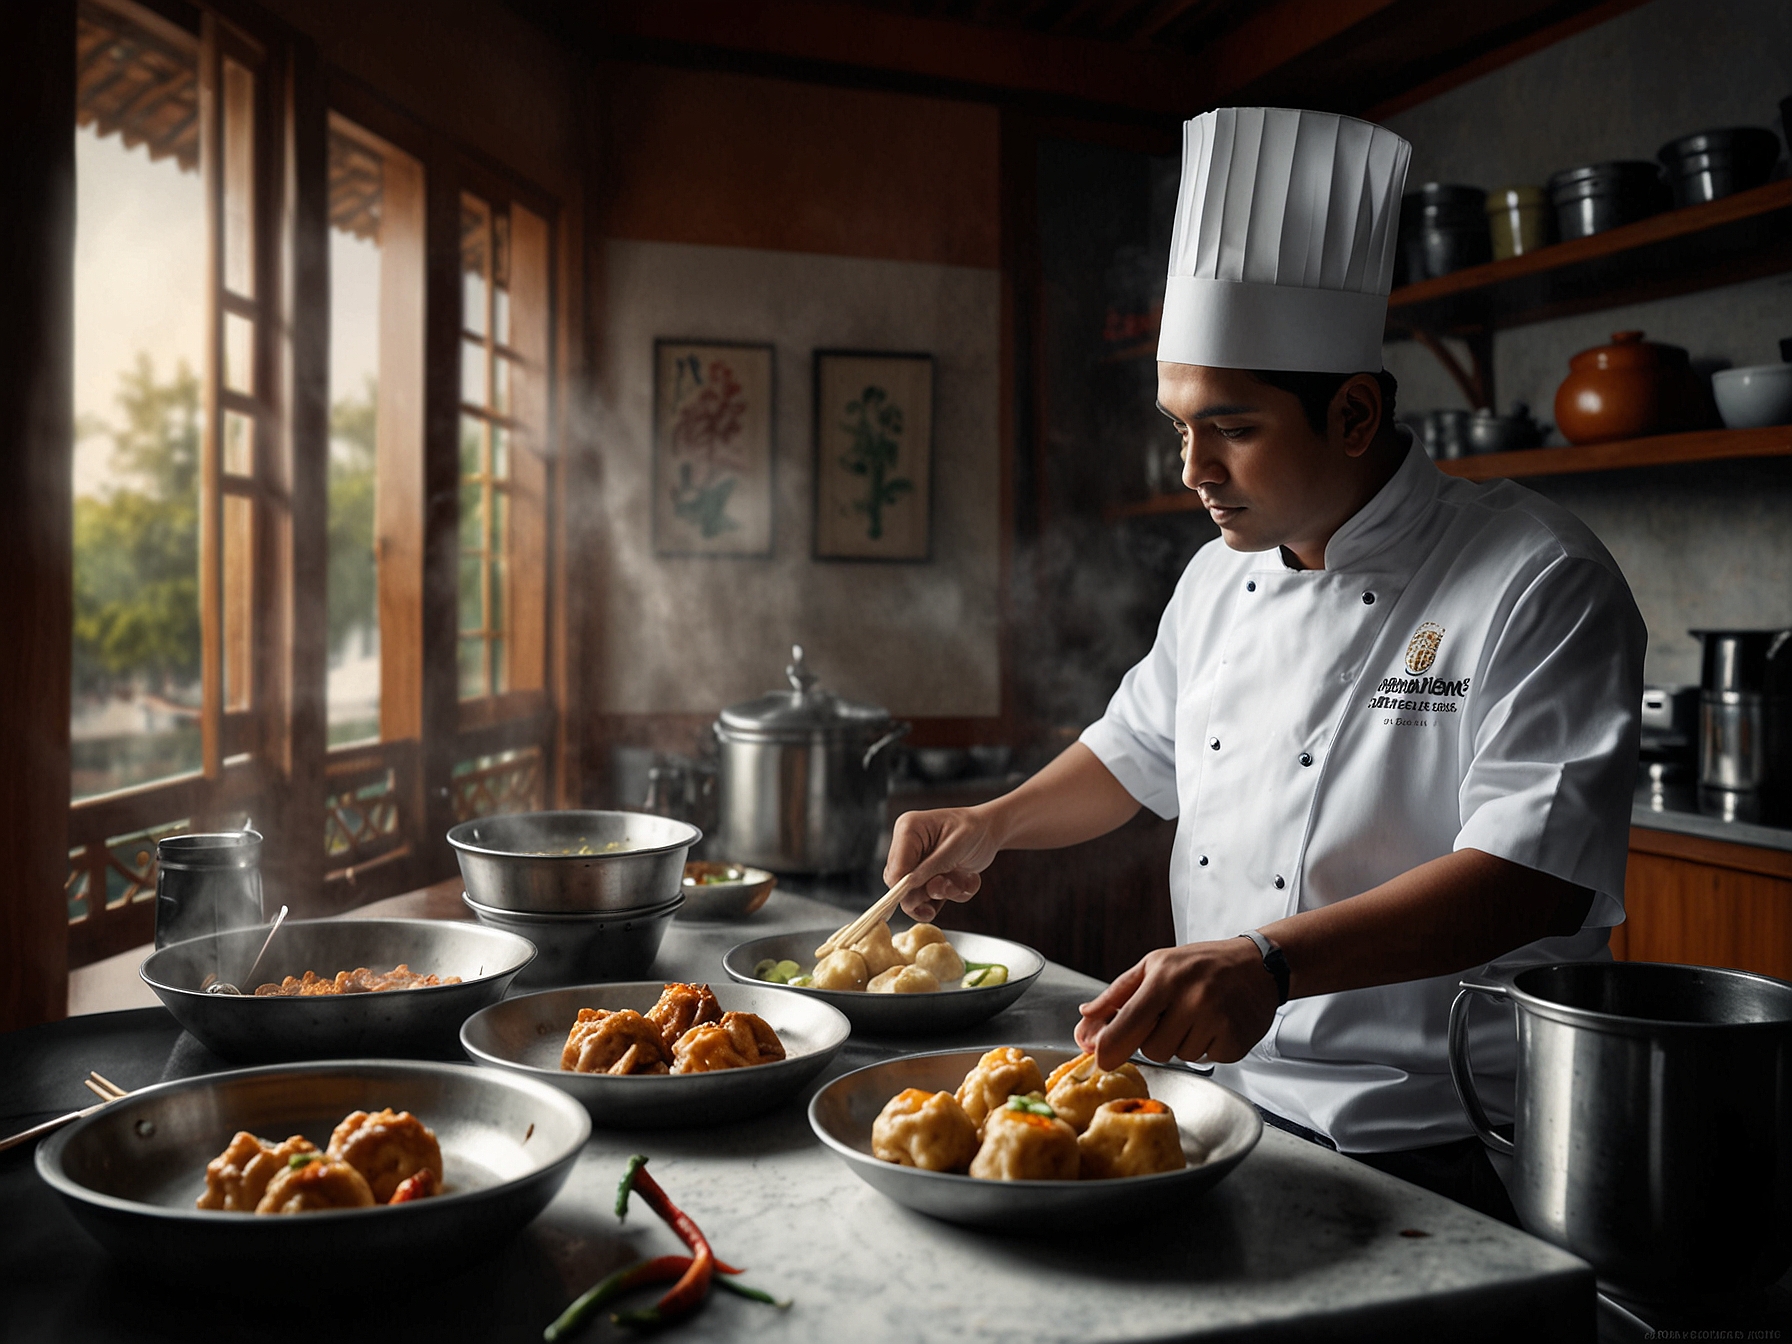 Chef Rajesh Deshmukh prepares his signature Tandoori Dim Sum in a fine-dining kitchen, showcasing the blend of Chinese ingredients and Indian culinary traditions.